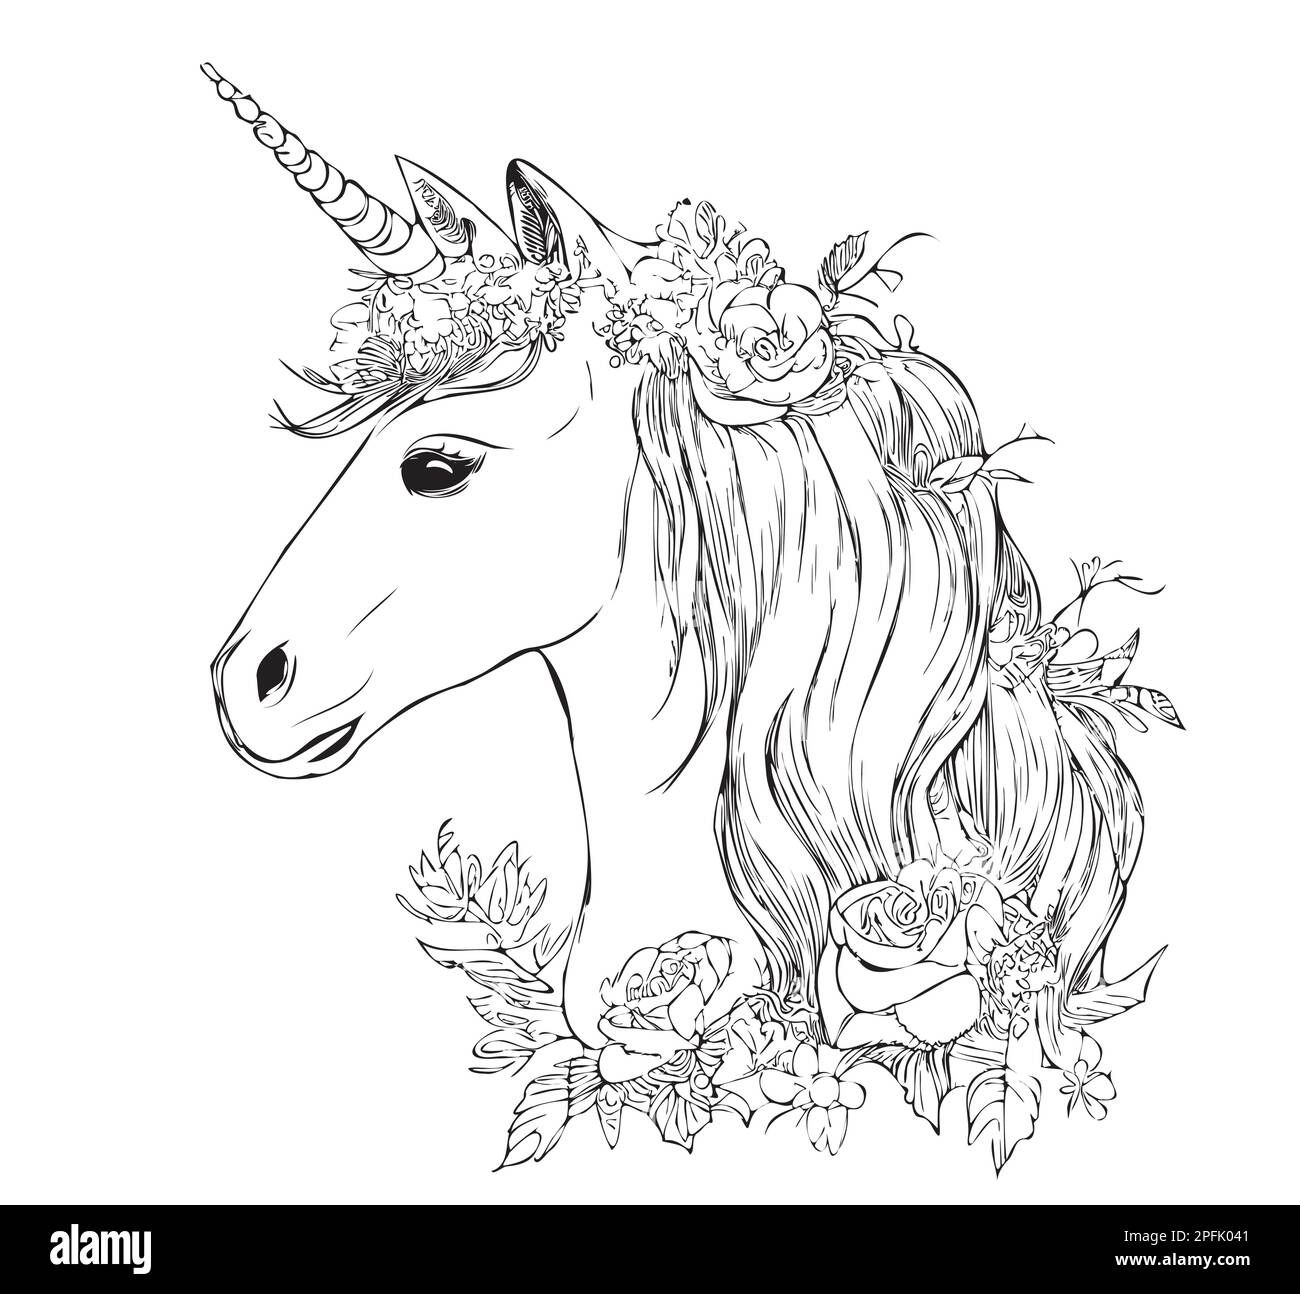 Magical unicorn head hand drawn sketch in doodle style illustration Fairy tales Stock Vector